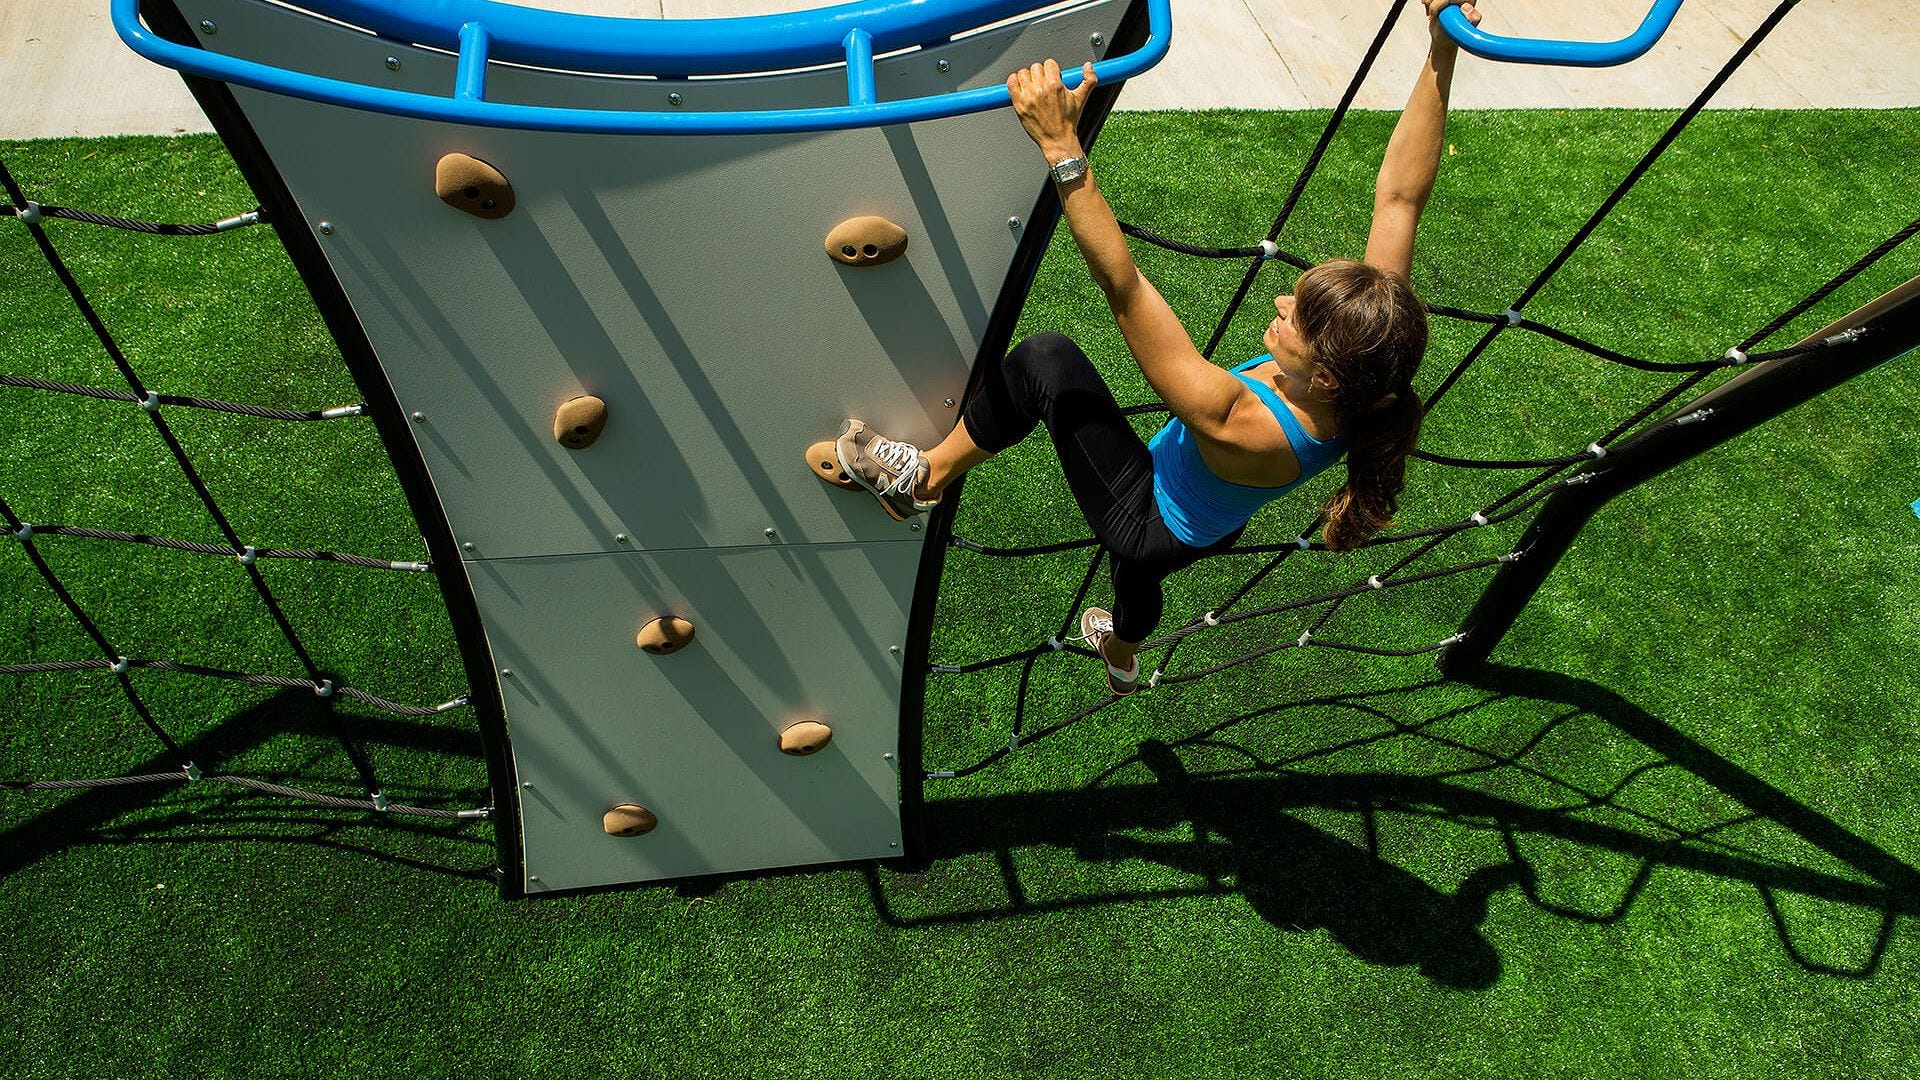 The Challenge Course outdoor fitness equipment lets you compete with friends and family.